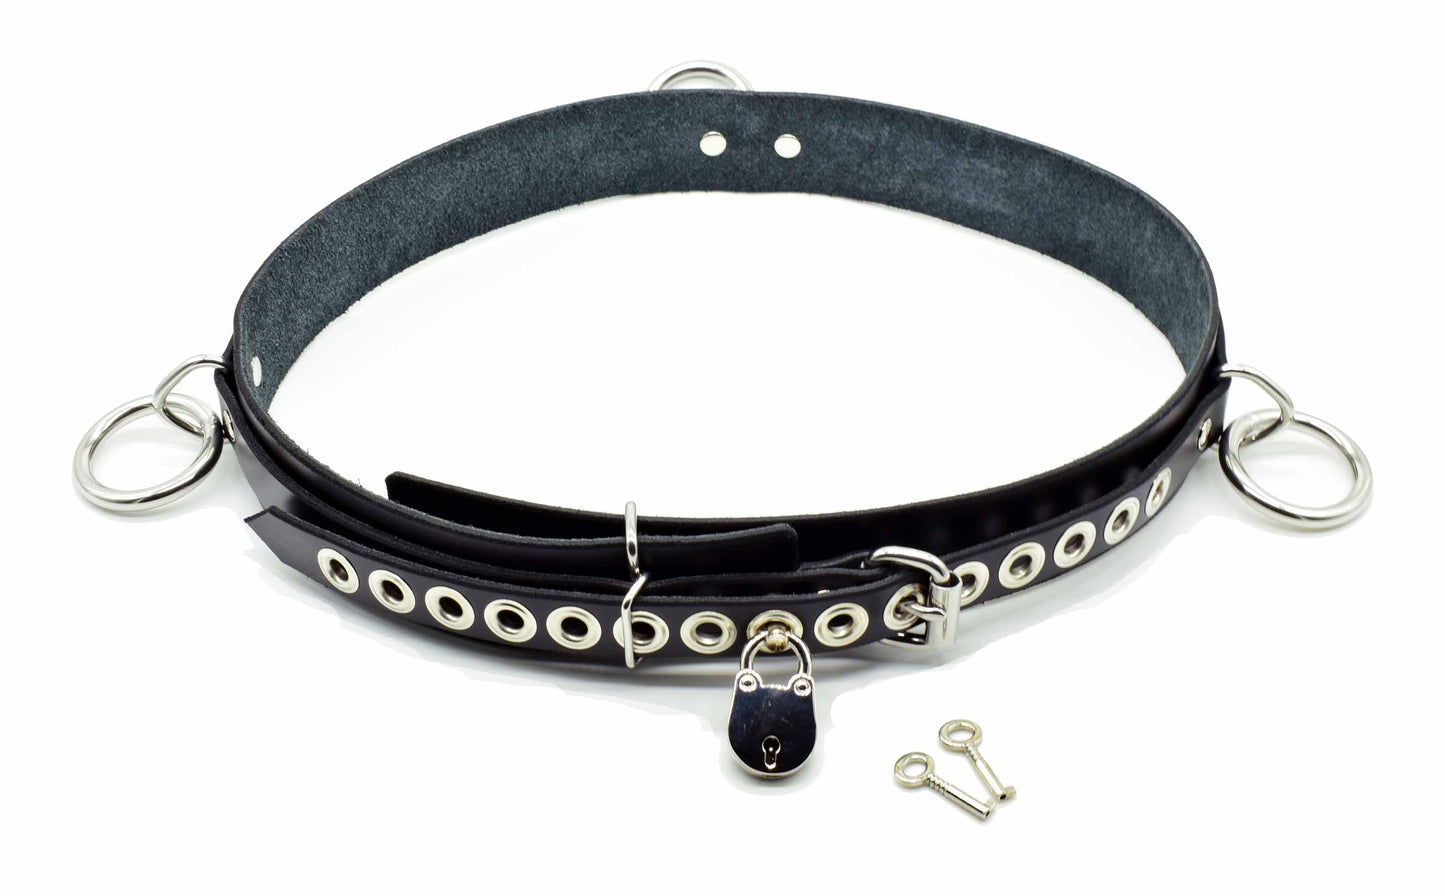 The Locking Leather Bondage Belt buckled with lock attached.